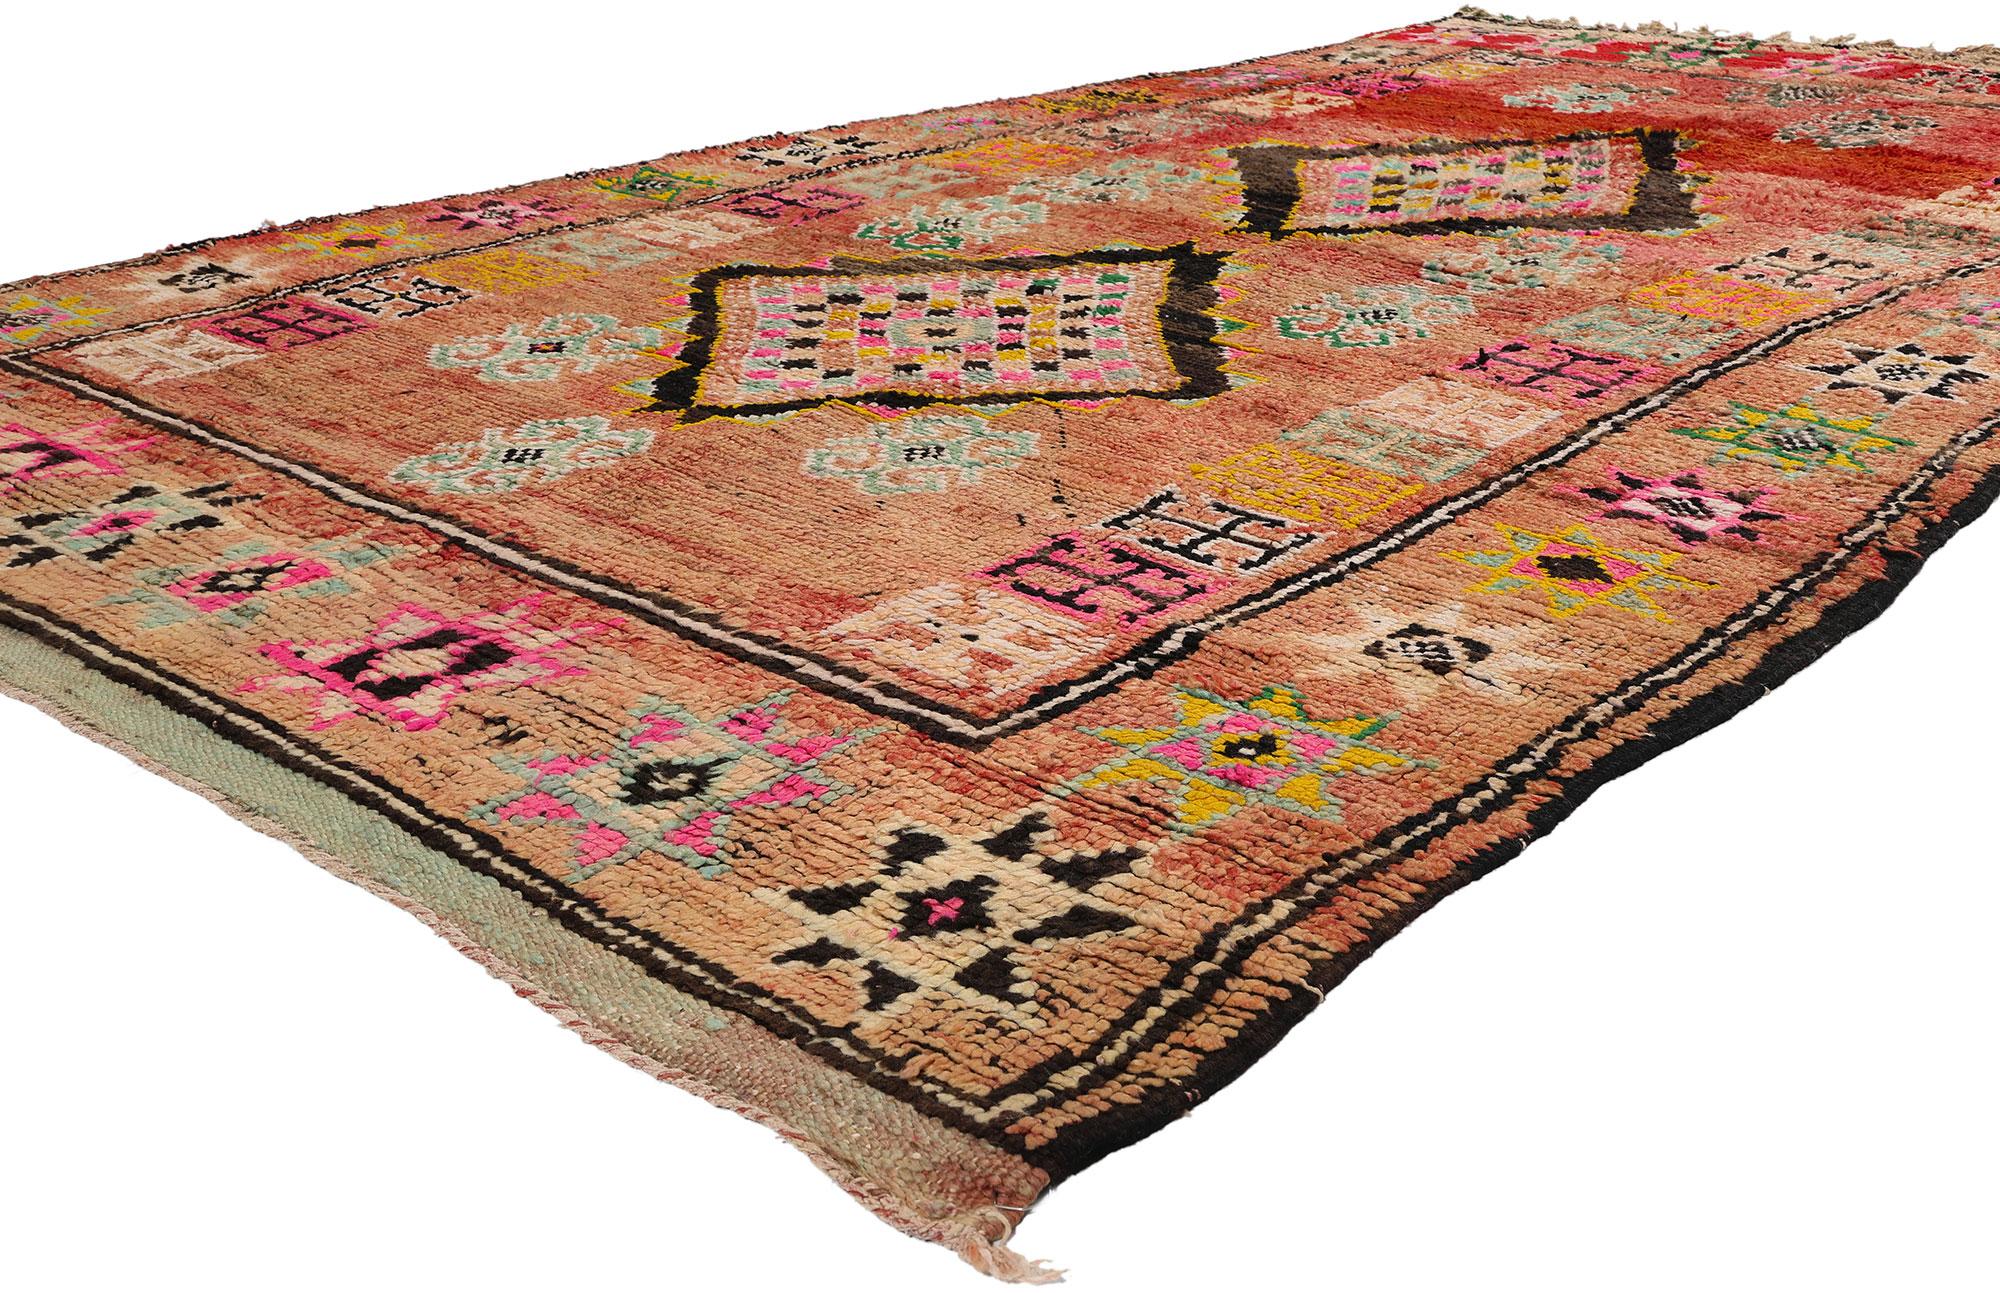 21747 Vintage Red Boujad Moroccan Rug, 05'05 x 09'01. Originating from Morocco's Boujad region, Boujad rugs encapsulate the vibrant artistic legacy of Berber tribes, notably the Haouz and Rehamna. These meticulously crafted rugs burst with a